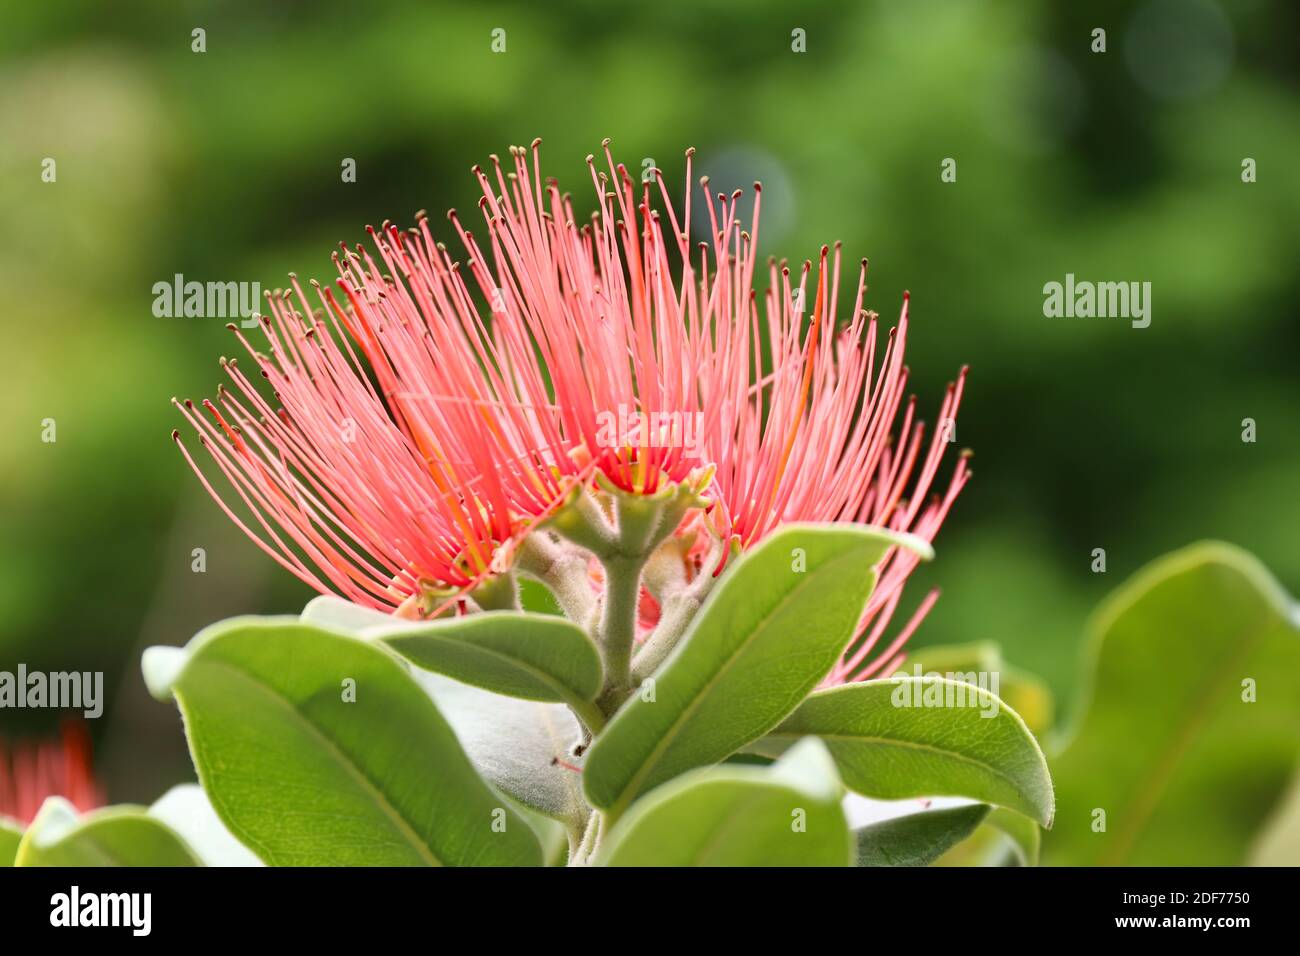 Bloom of the Persian silk tree - albizia julibrissin - detail, shallow depth of field Stock Photo